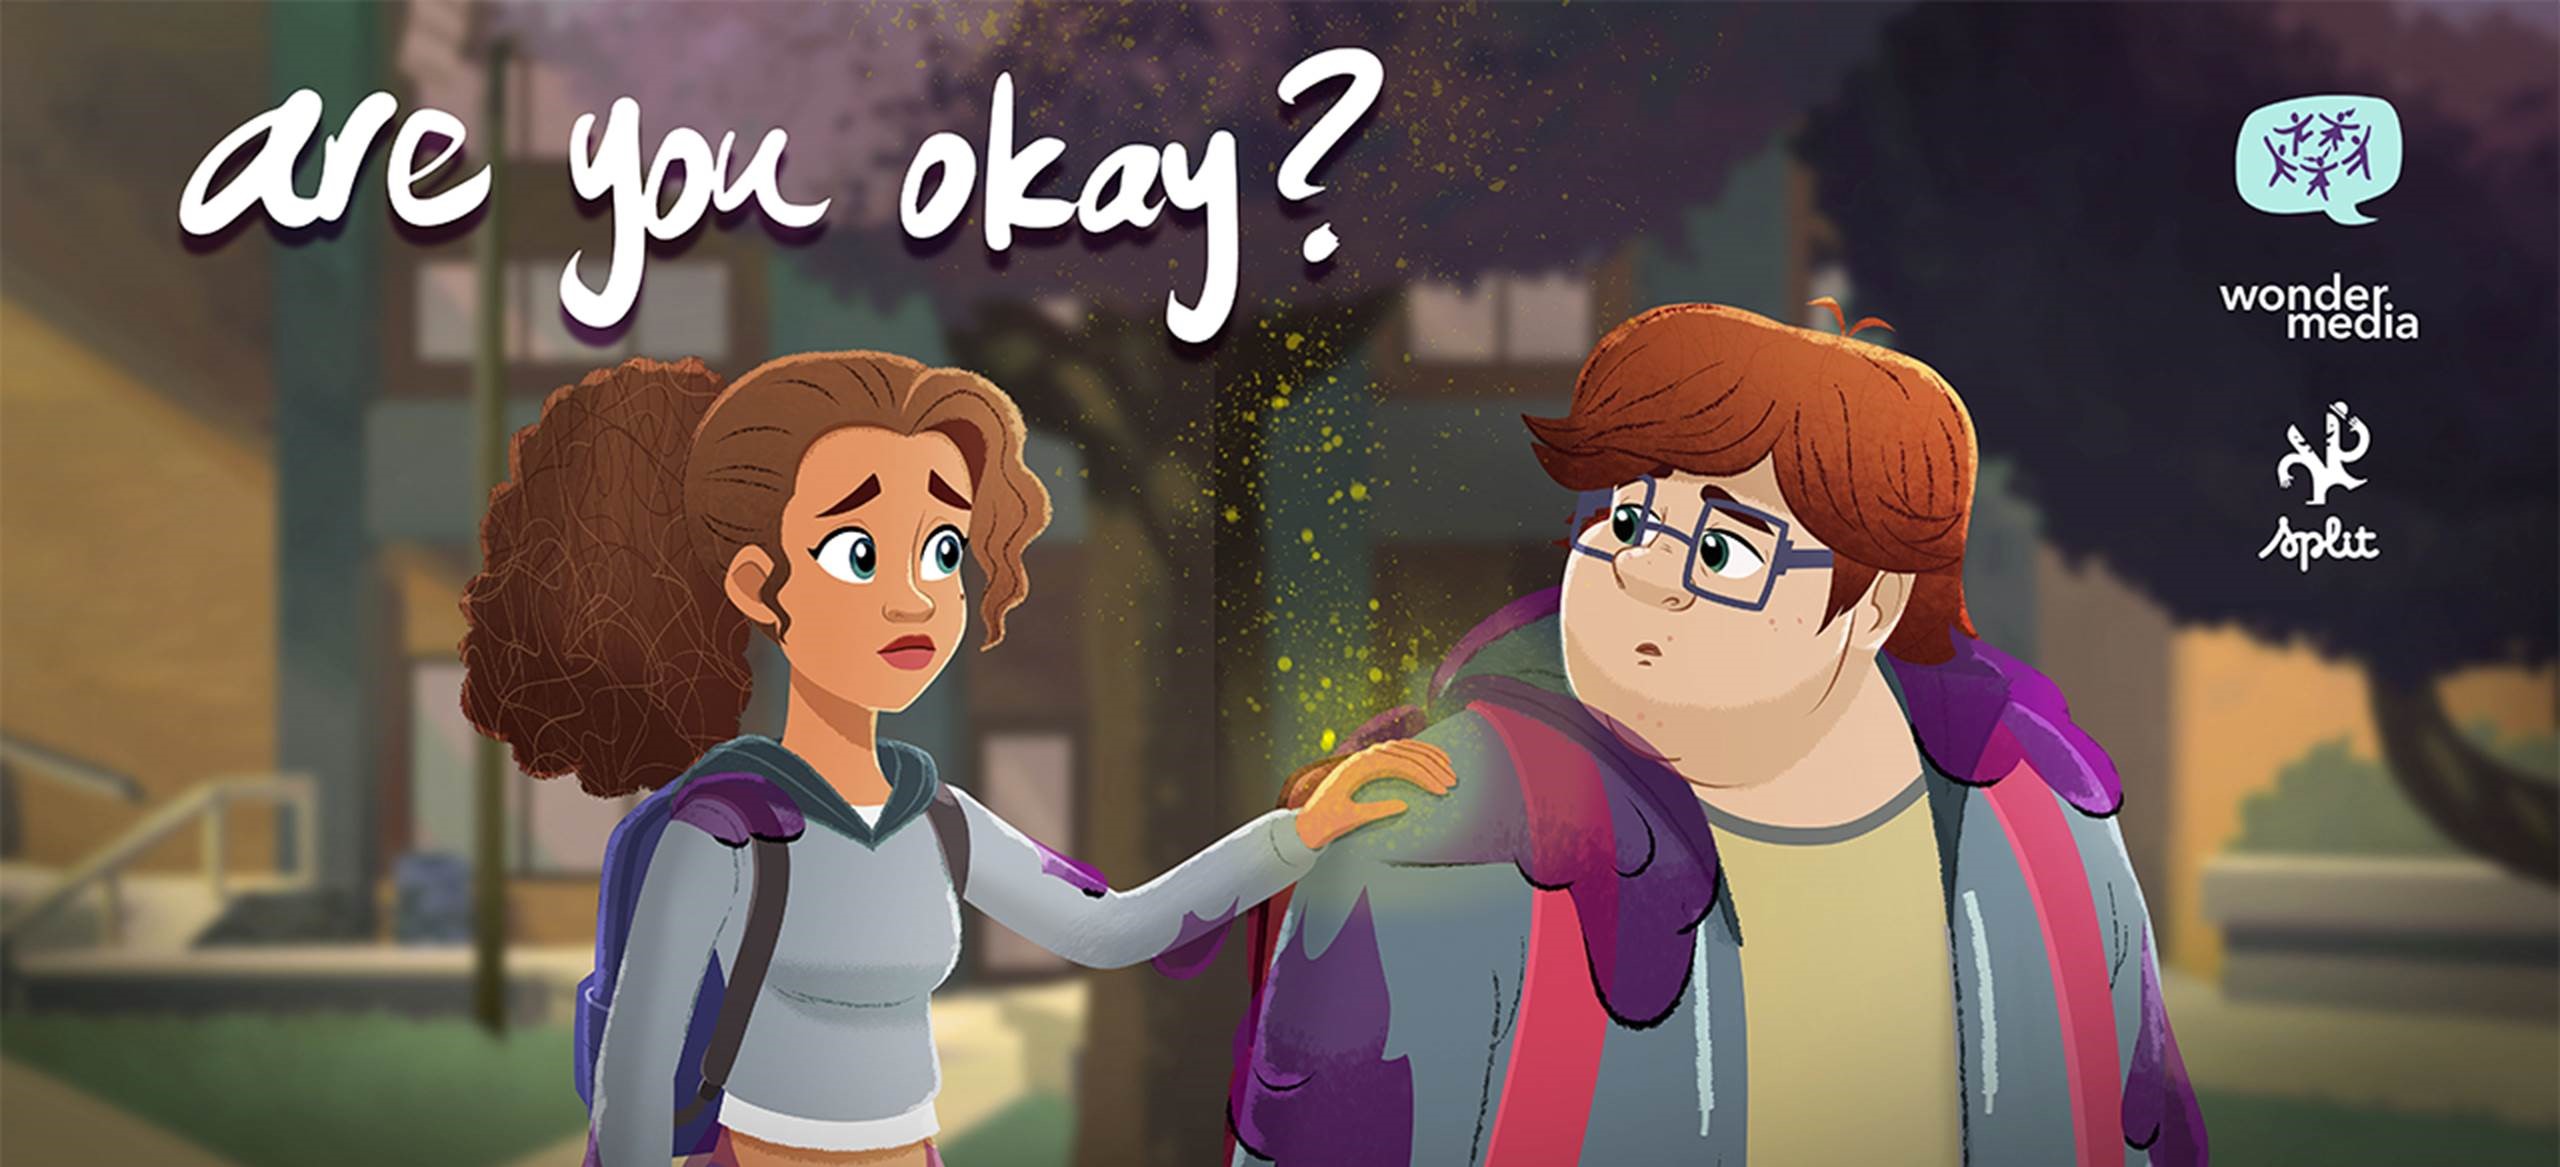 Terry Thoren's Animation to reach children in crisis - text reads "are you okay?"